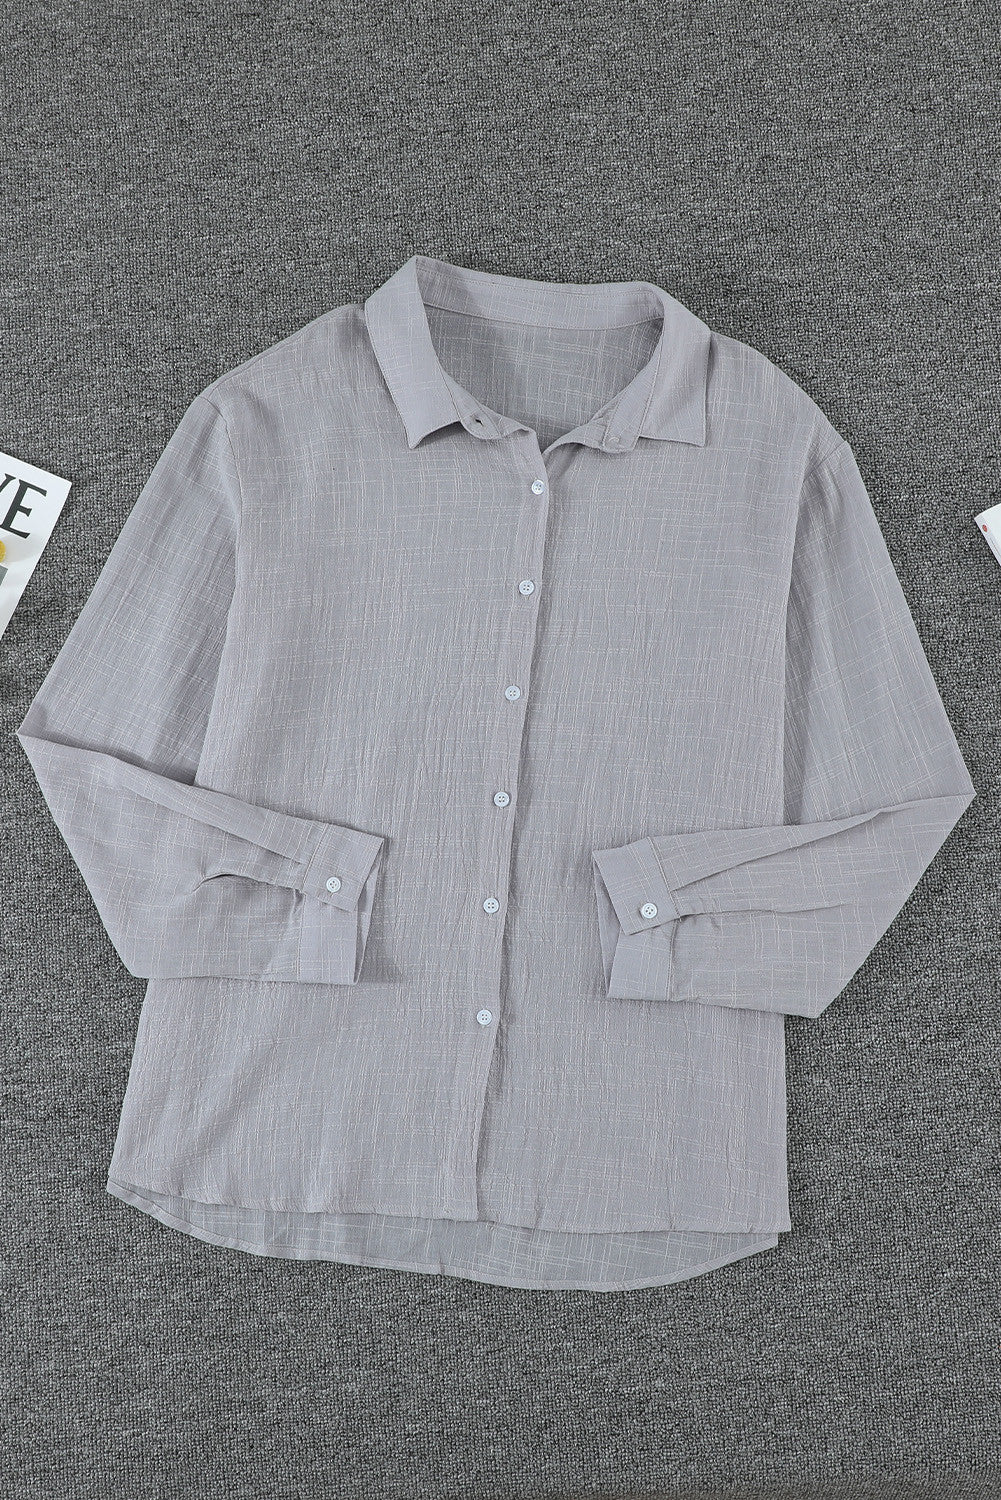 Textured Solid Color Basic Shirt